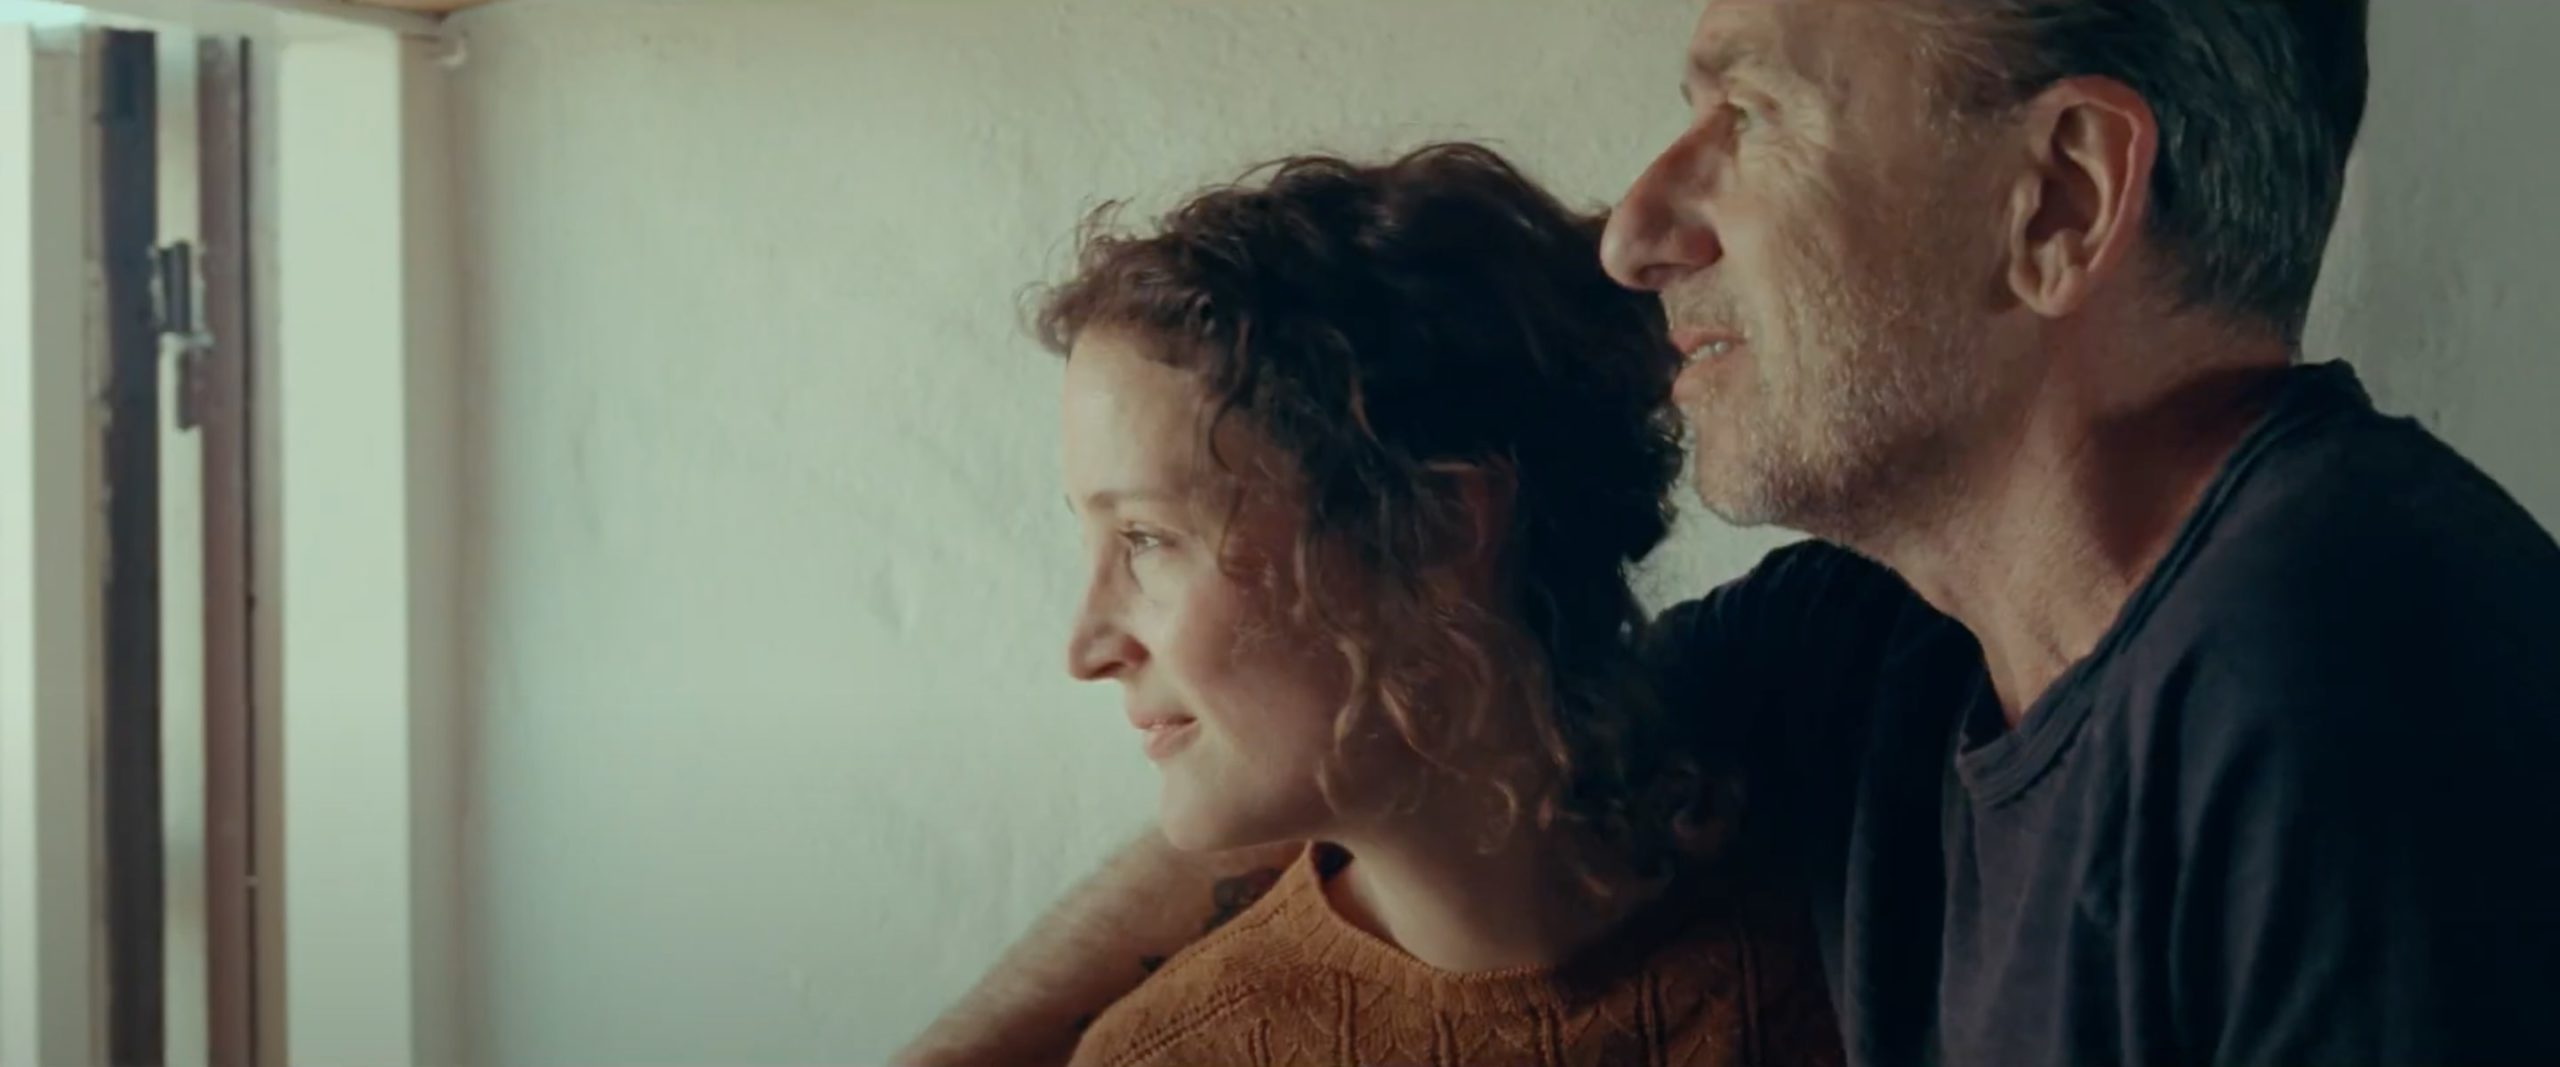 Hold Me Tight Review: Mathieu Amalric's Restless Portrait of a Woman  Grieving